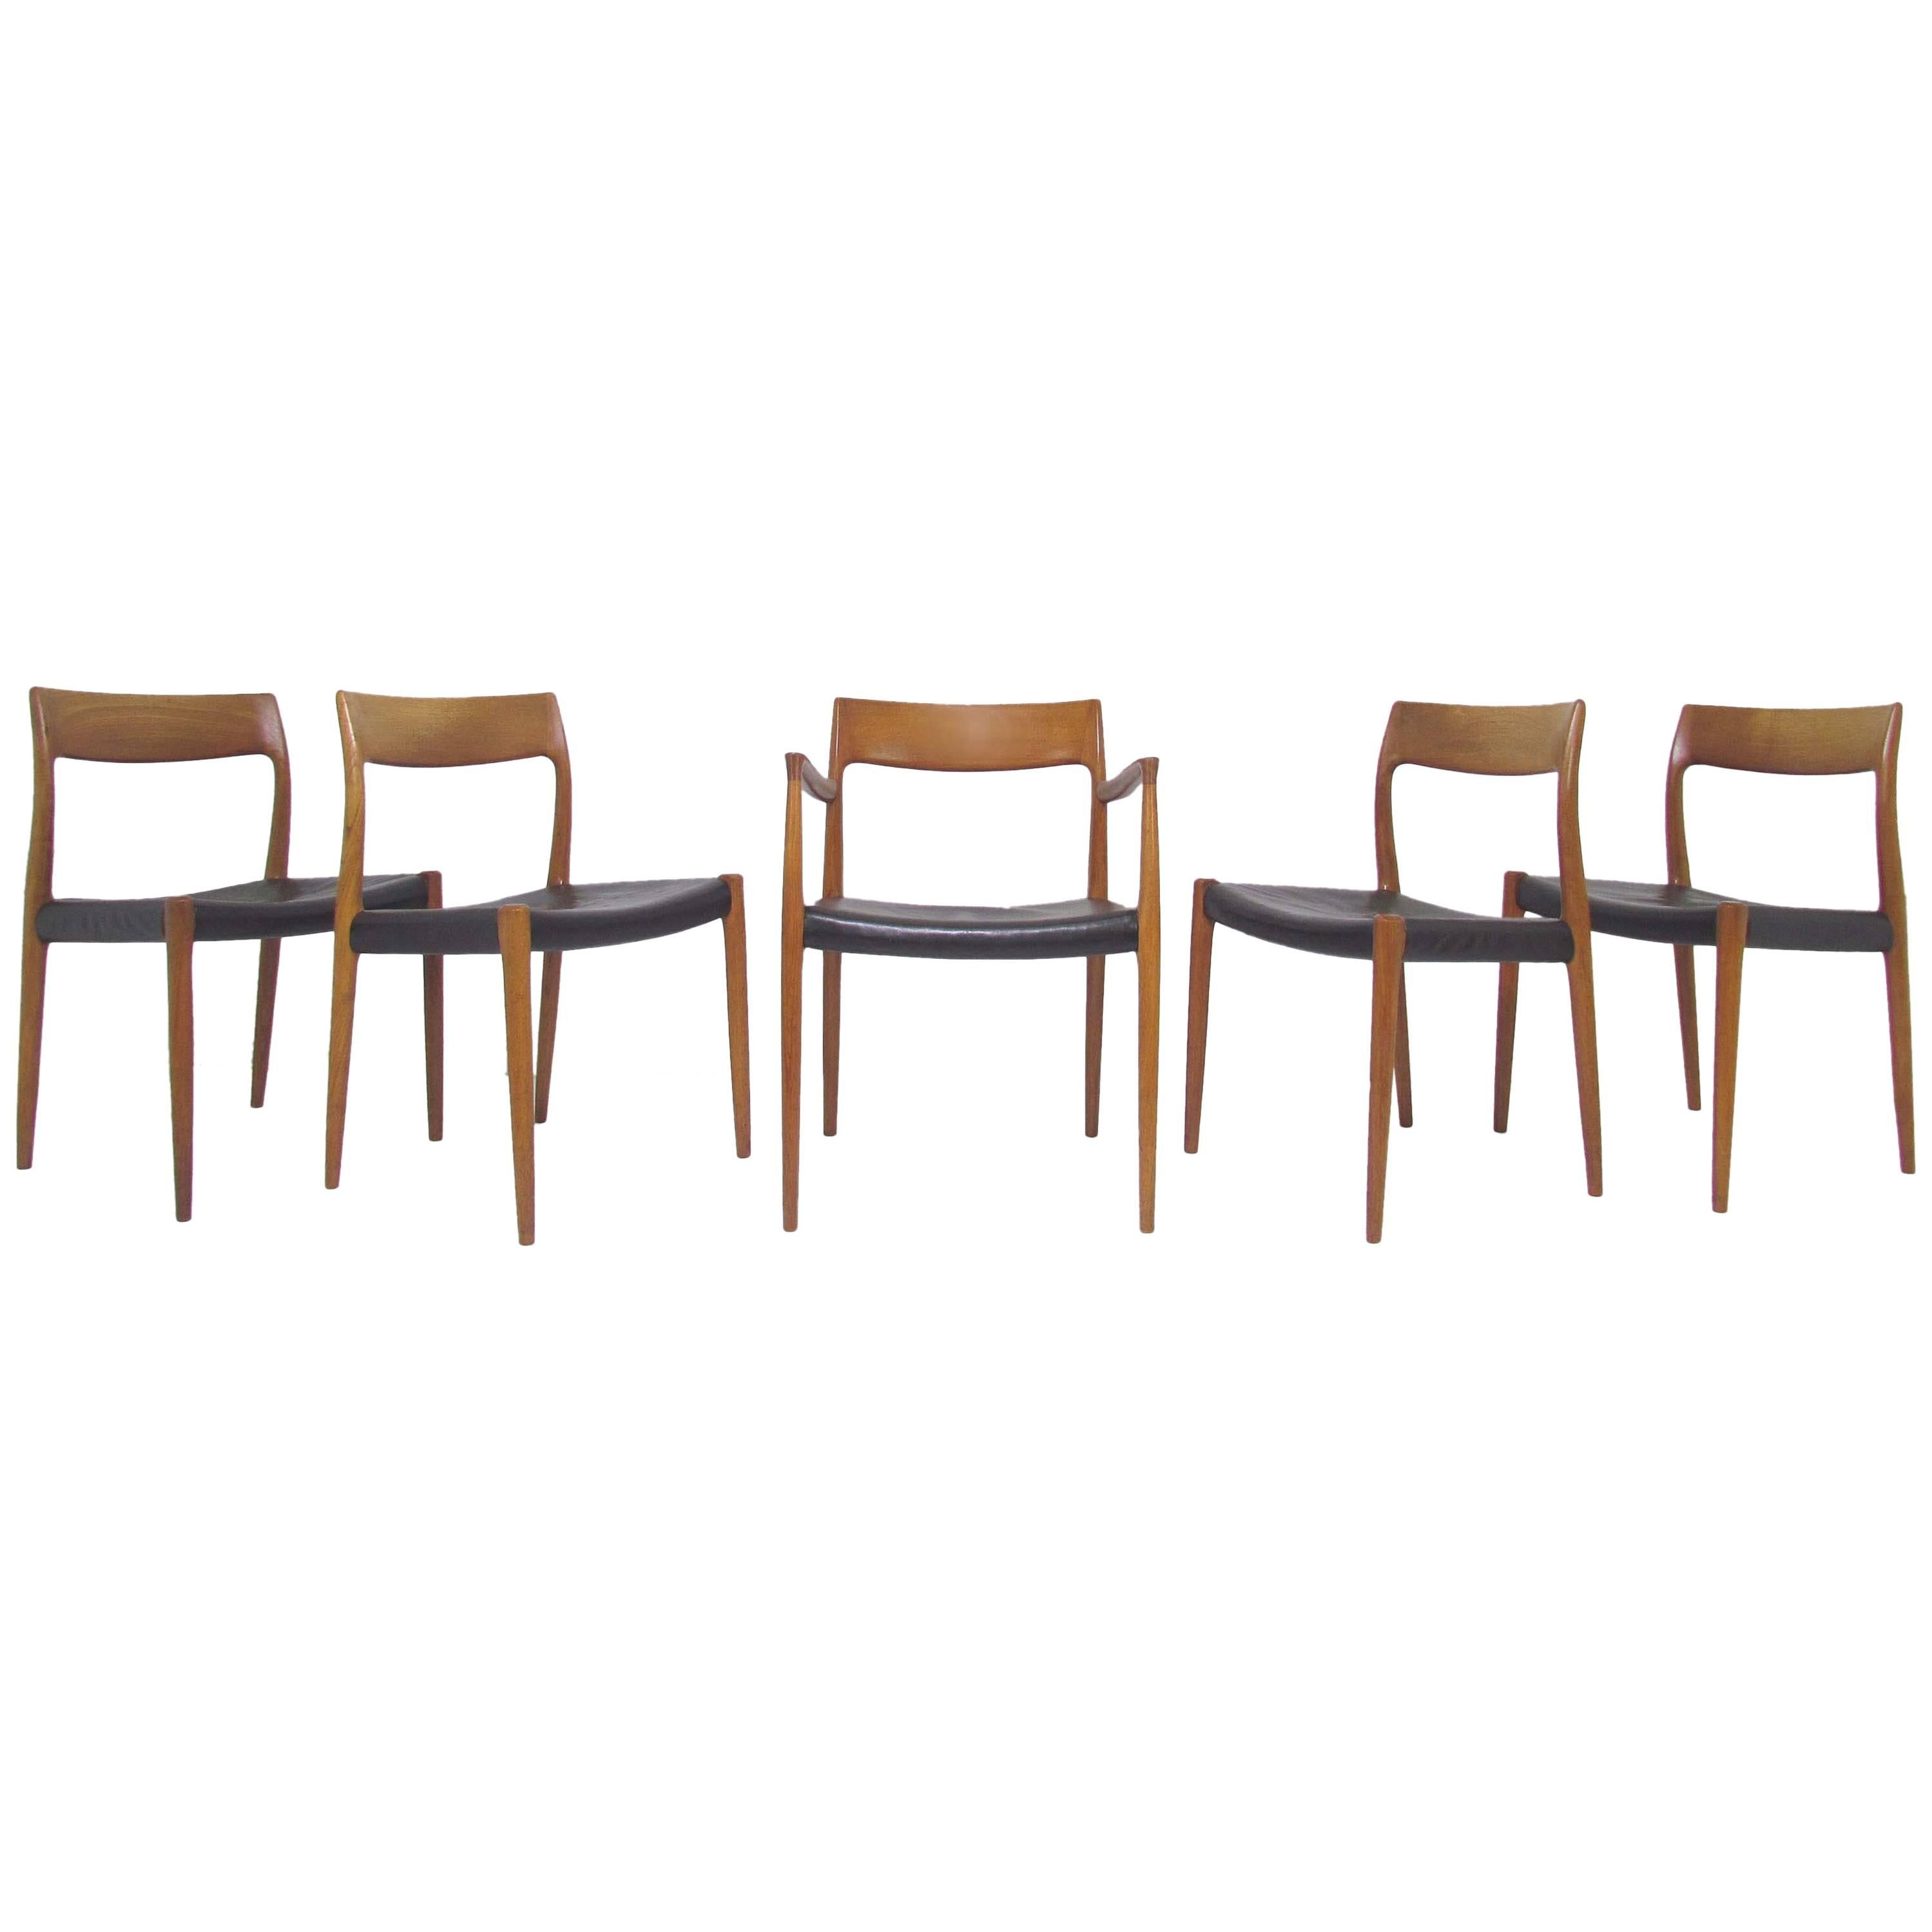 Set of Five Danish Teak Dining Chairs by Niels Moller for Jl Moller, circa 1960s